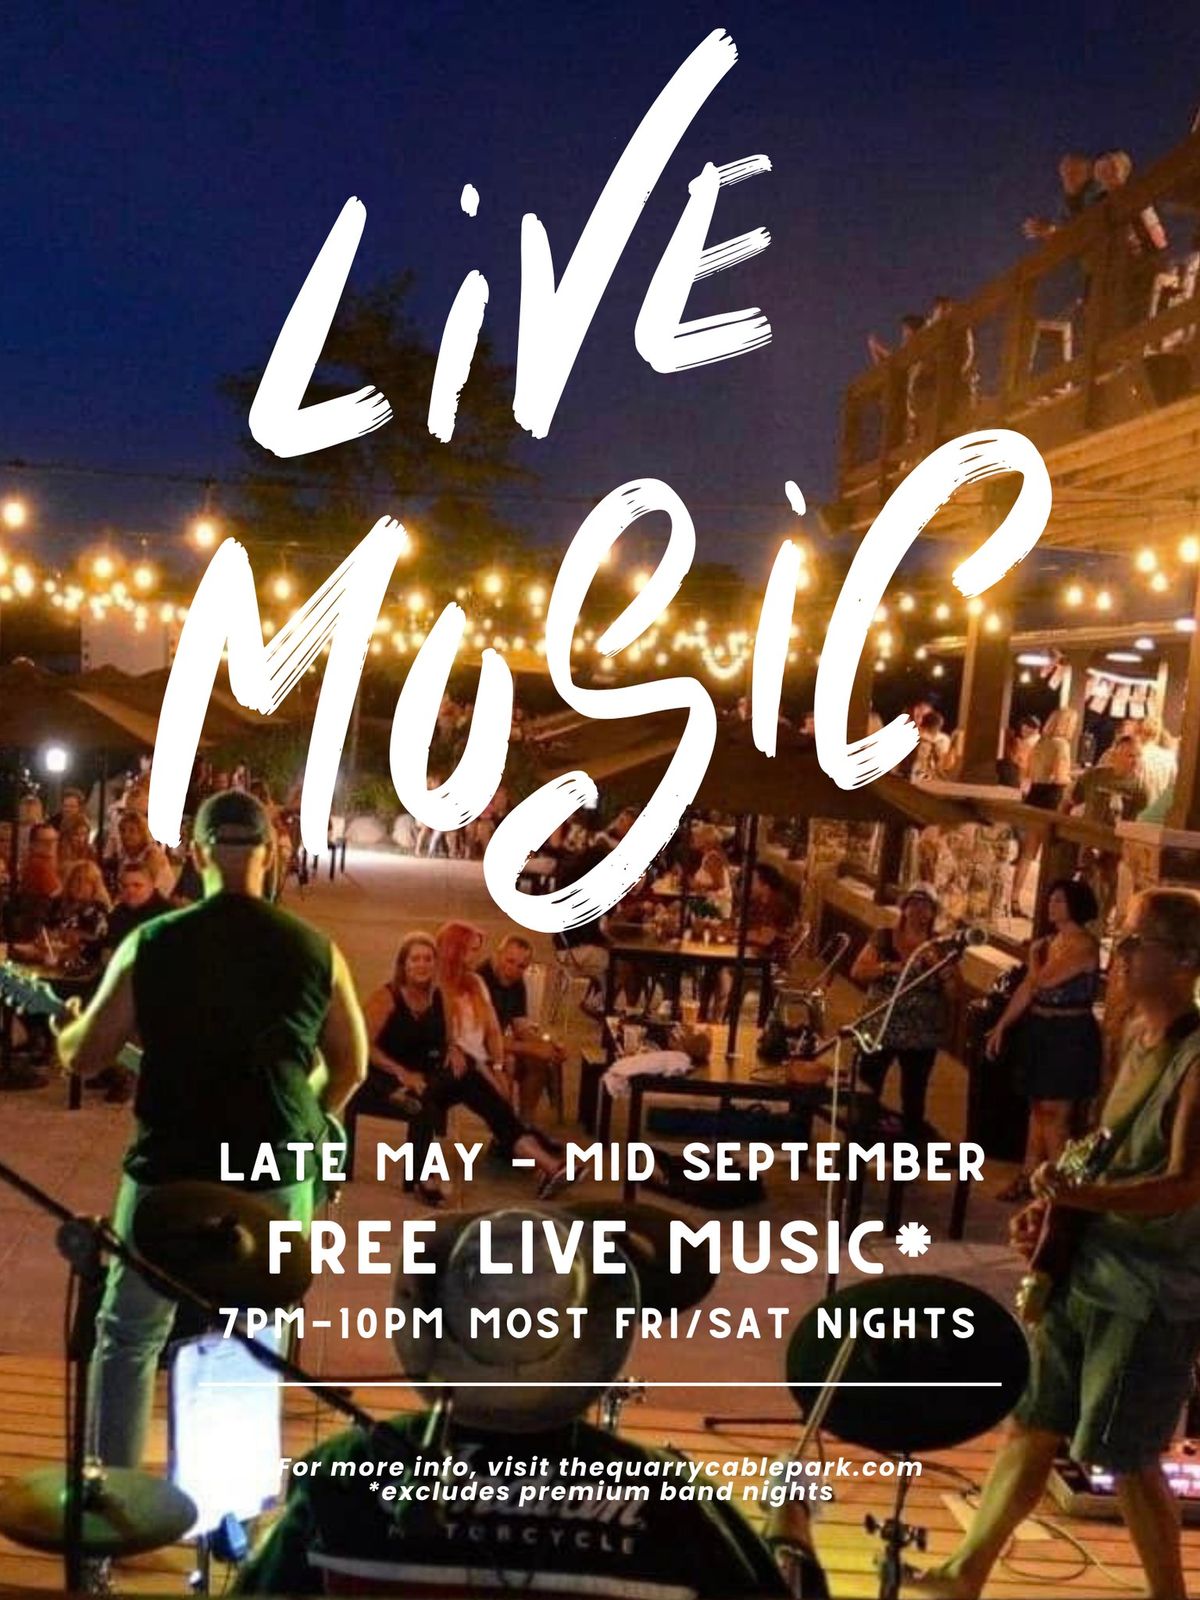 Free Live Music - Lakeside @ The Quarry *excludes premium nights